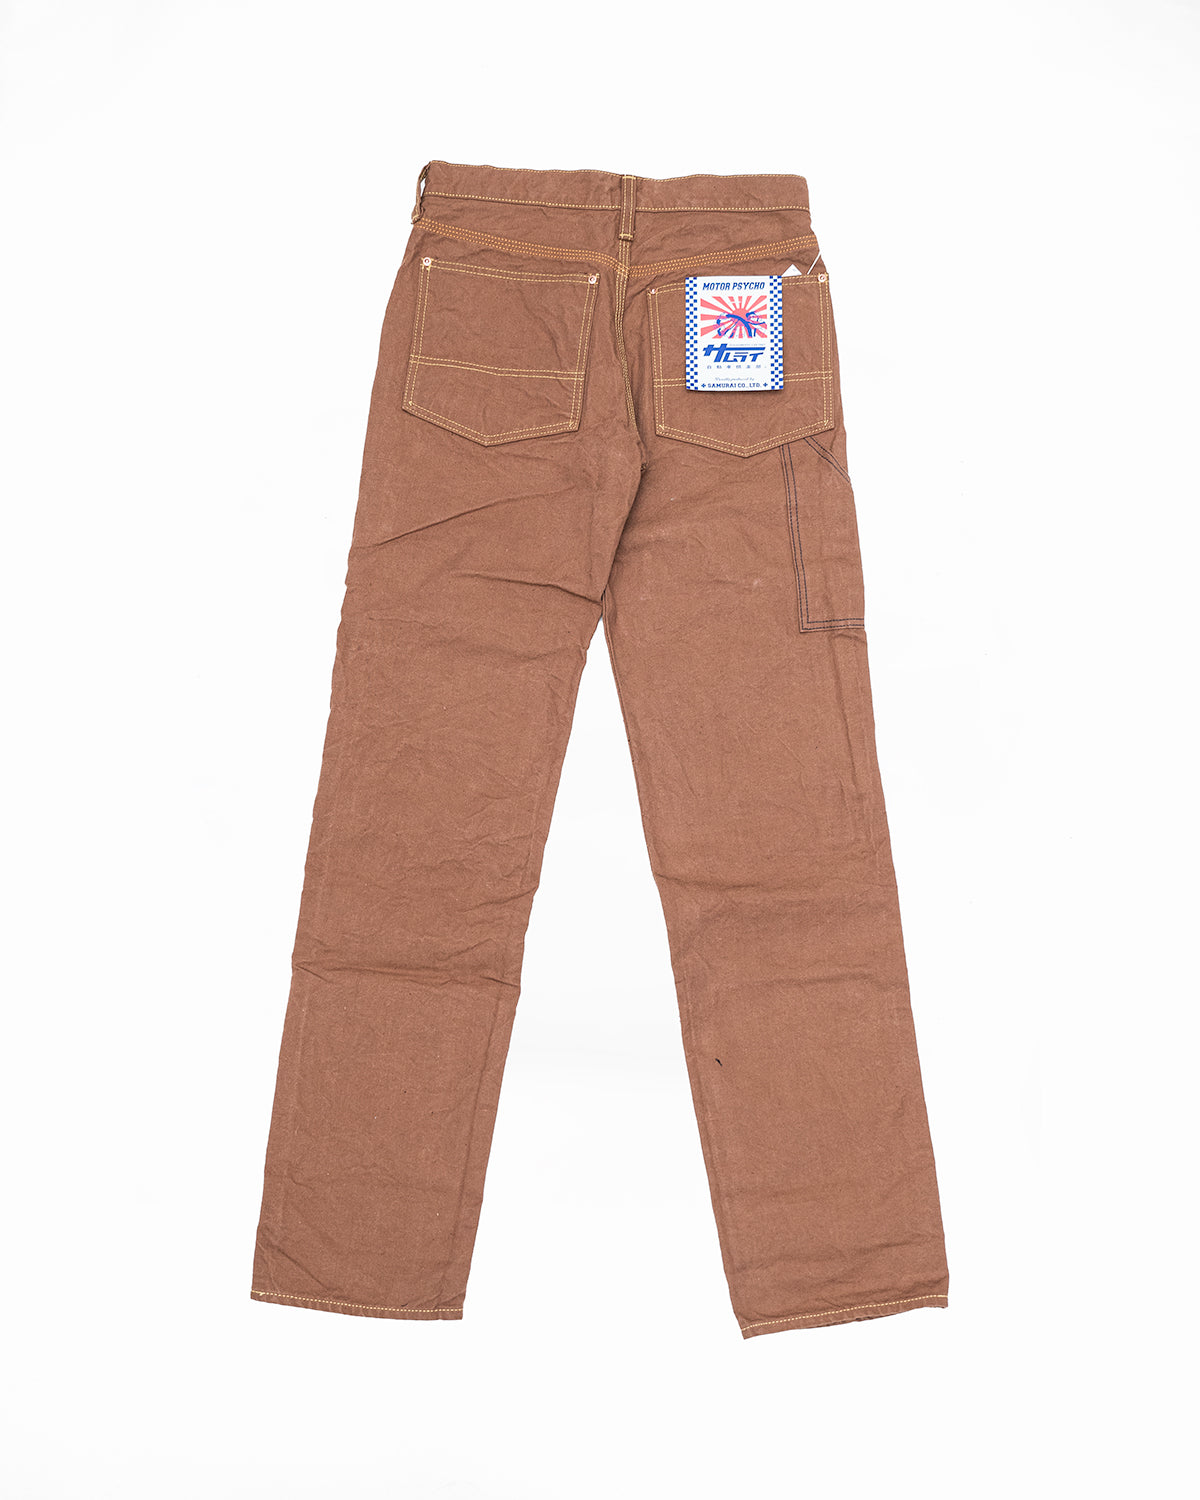 SM410DBN-DUCK - 15oz Sulfur Brown Double Knee Duck Canvas Pants - Stra